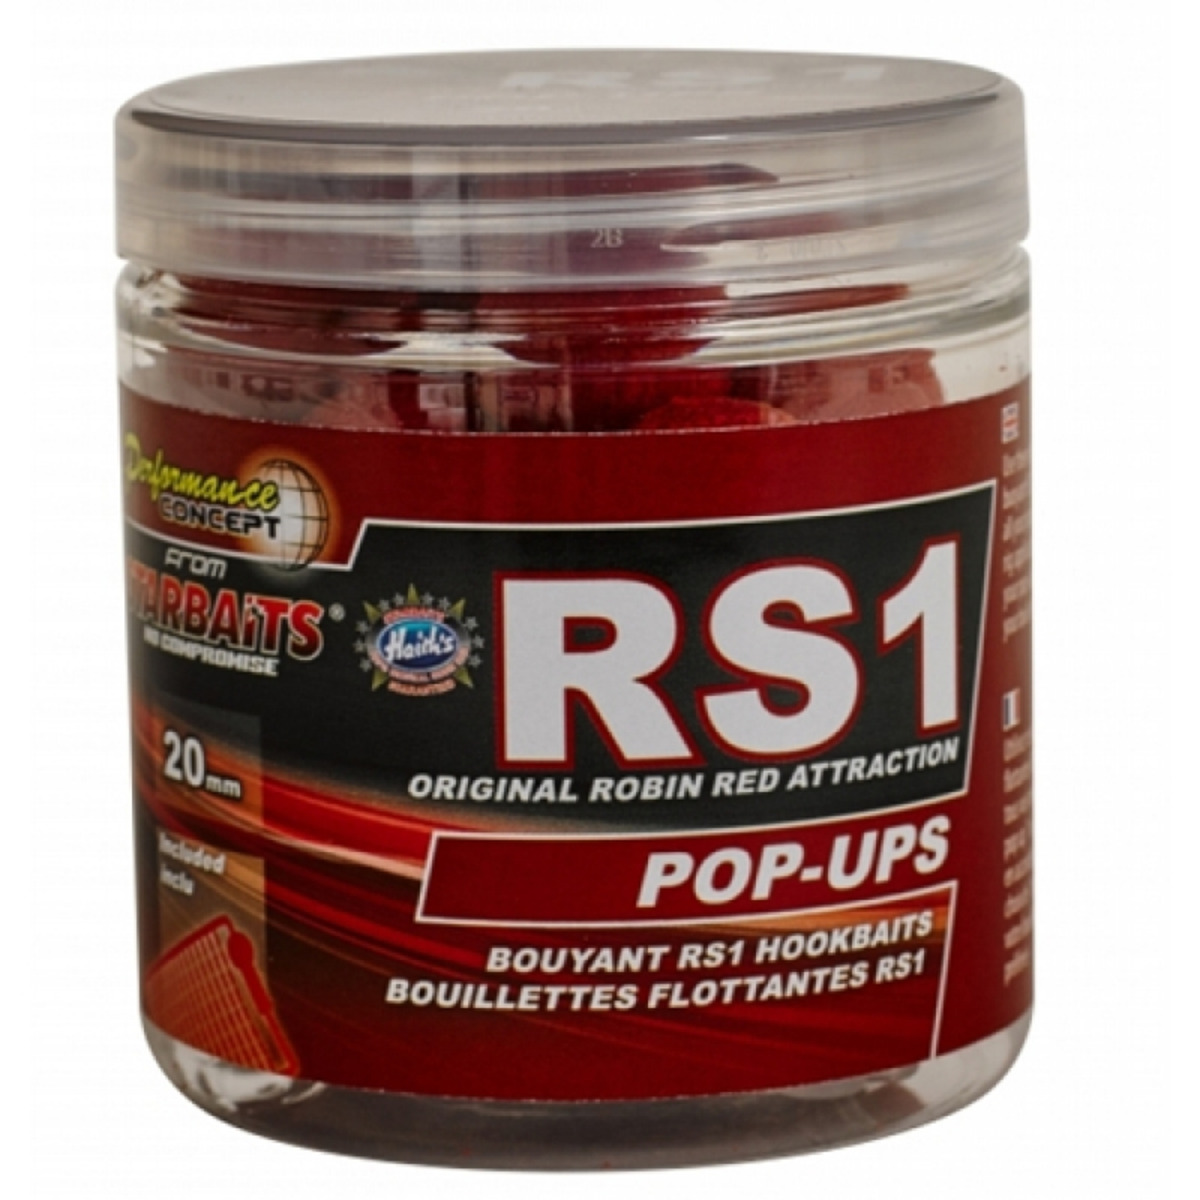 Starbaits Concept Pop Ups Rs1 - 20 mm  - 80 g